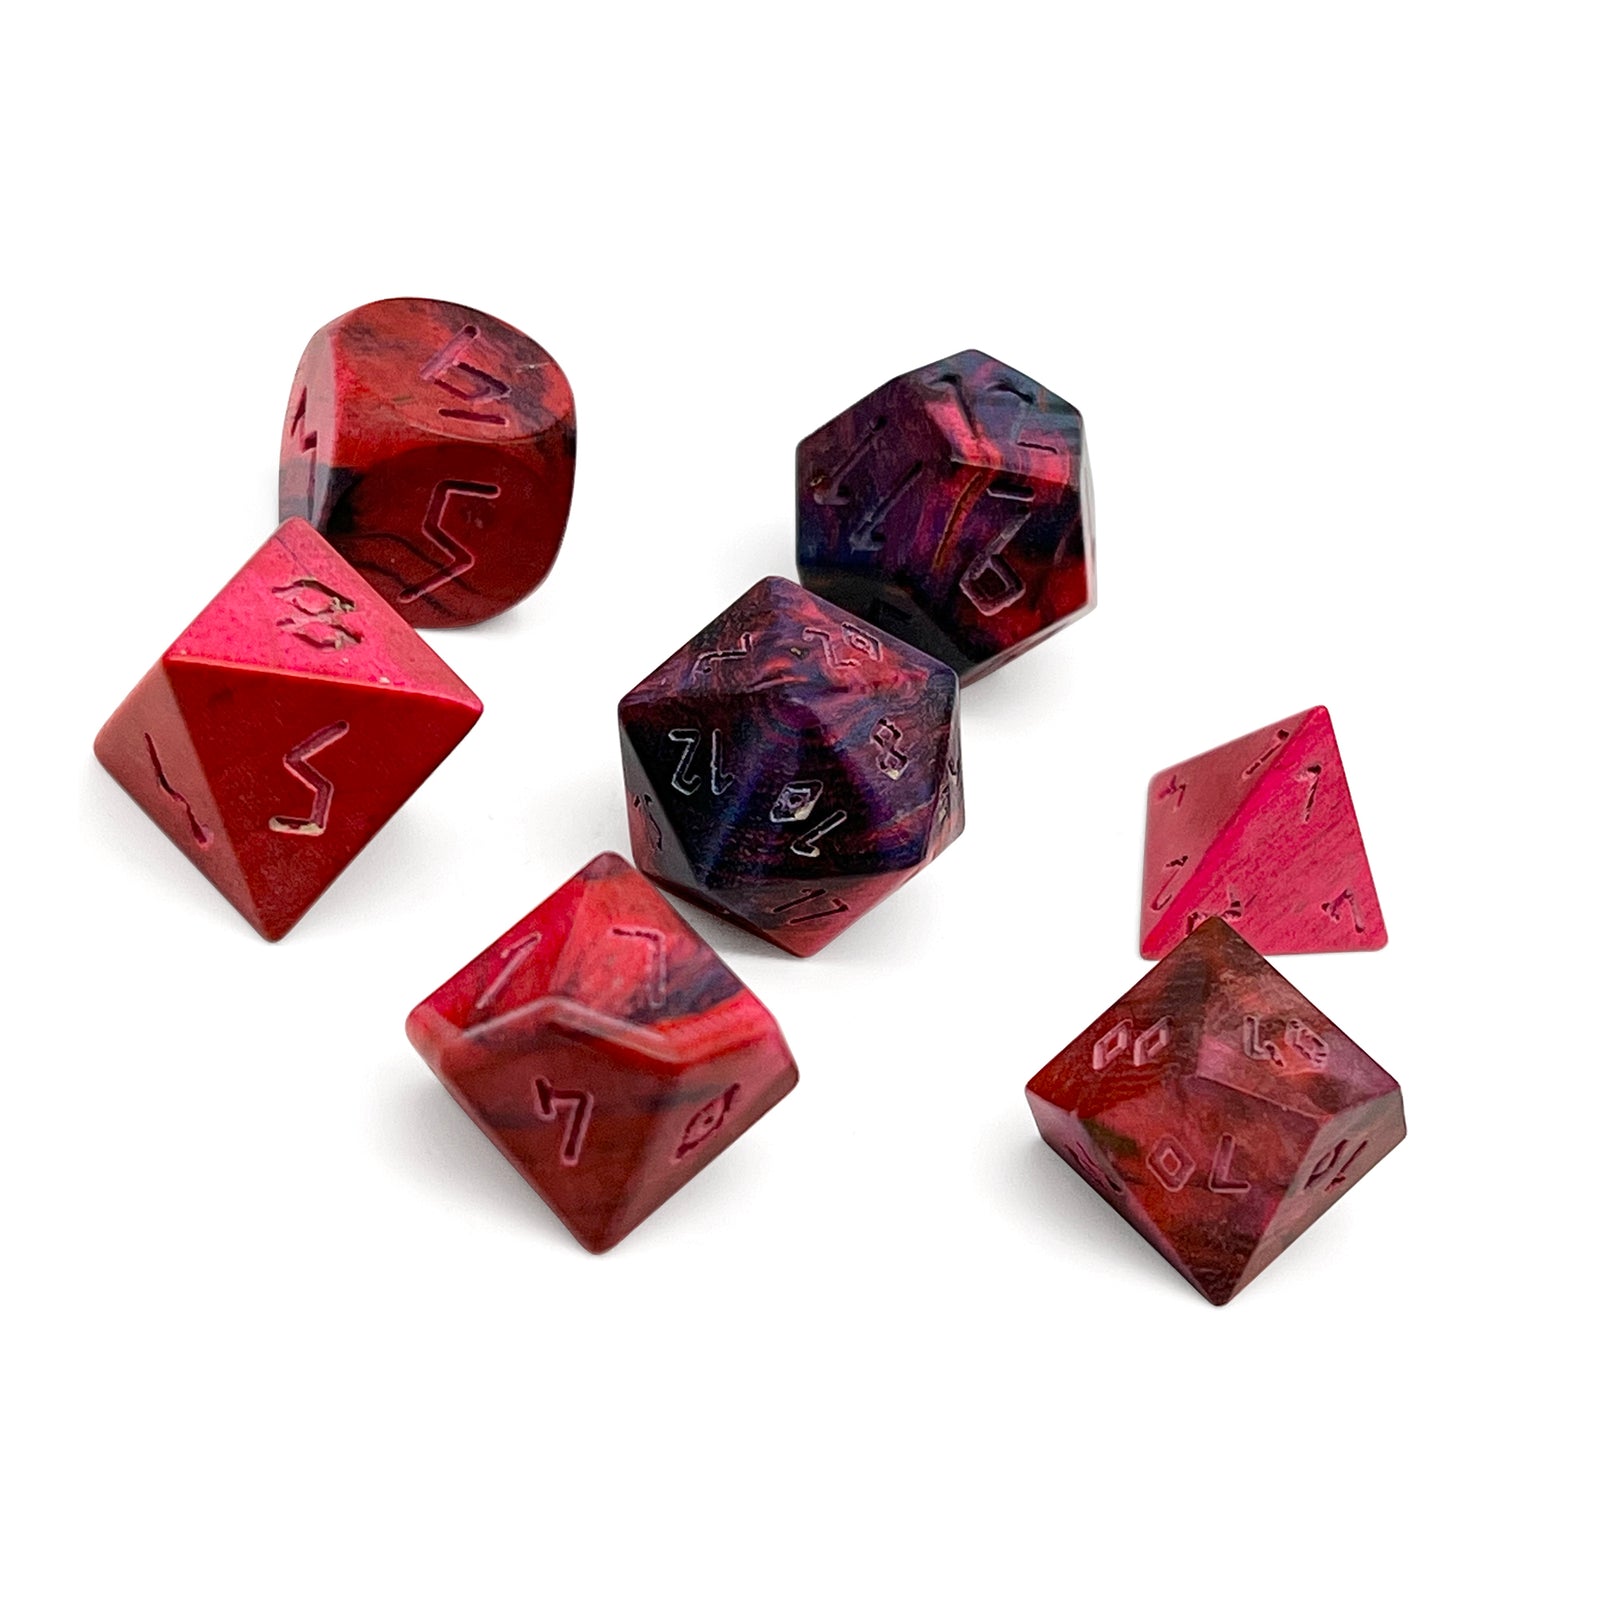 Red Striped Wood - 7 Piece RPG Wooden Dice Set